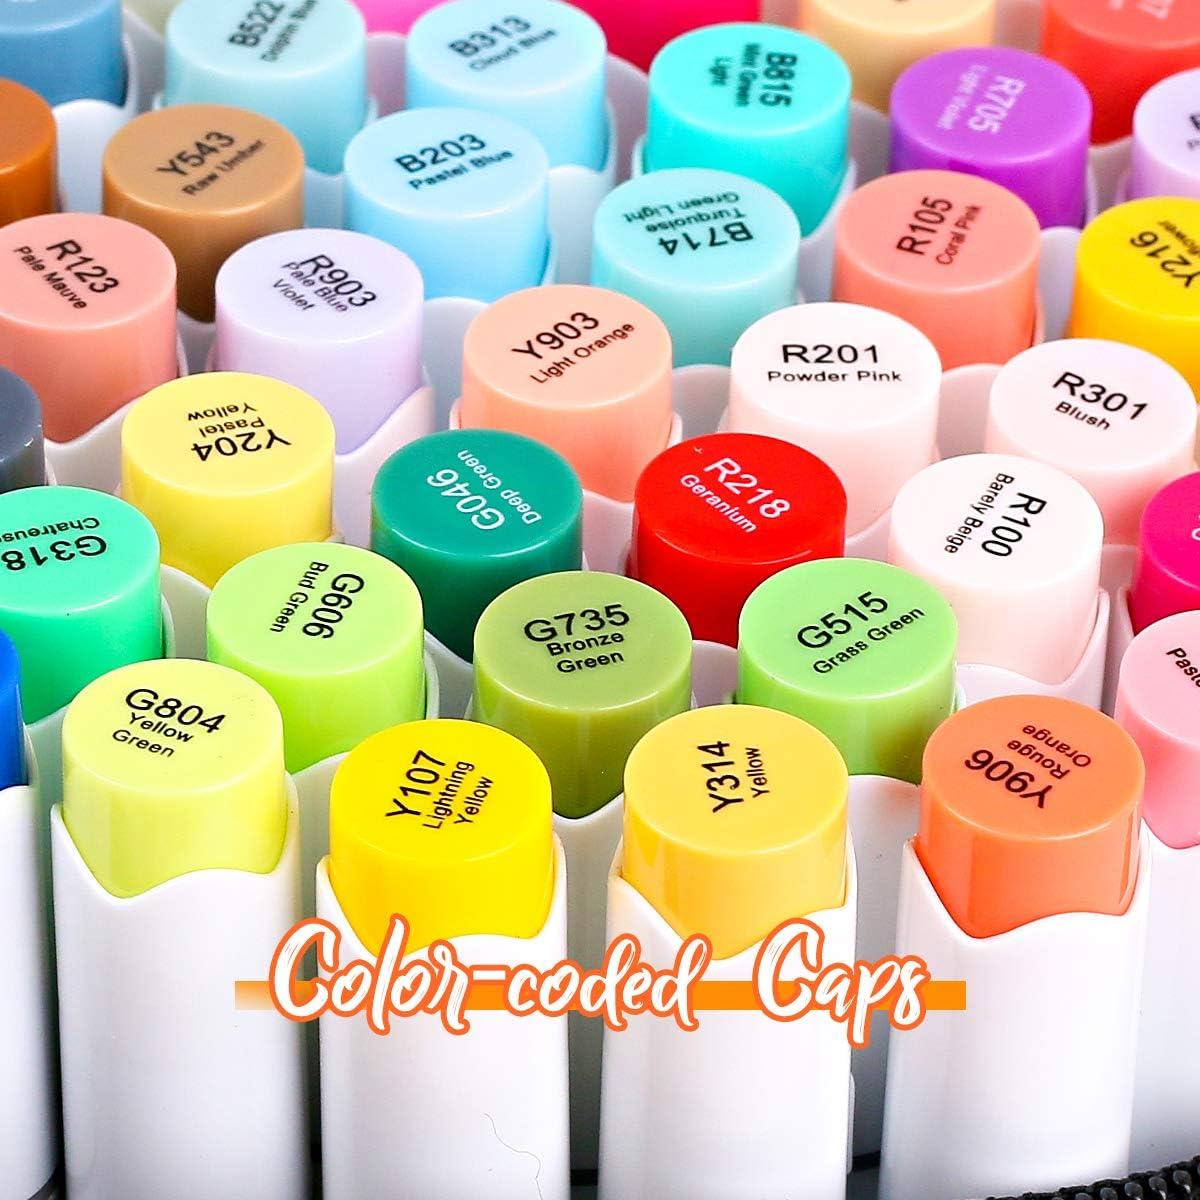 Caliart 100 Colors Artist Alcohol Markers Dual Tip Art Markers